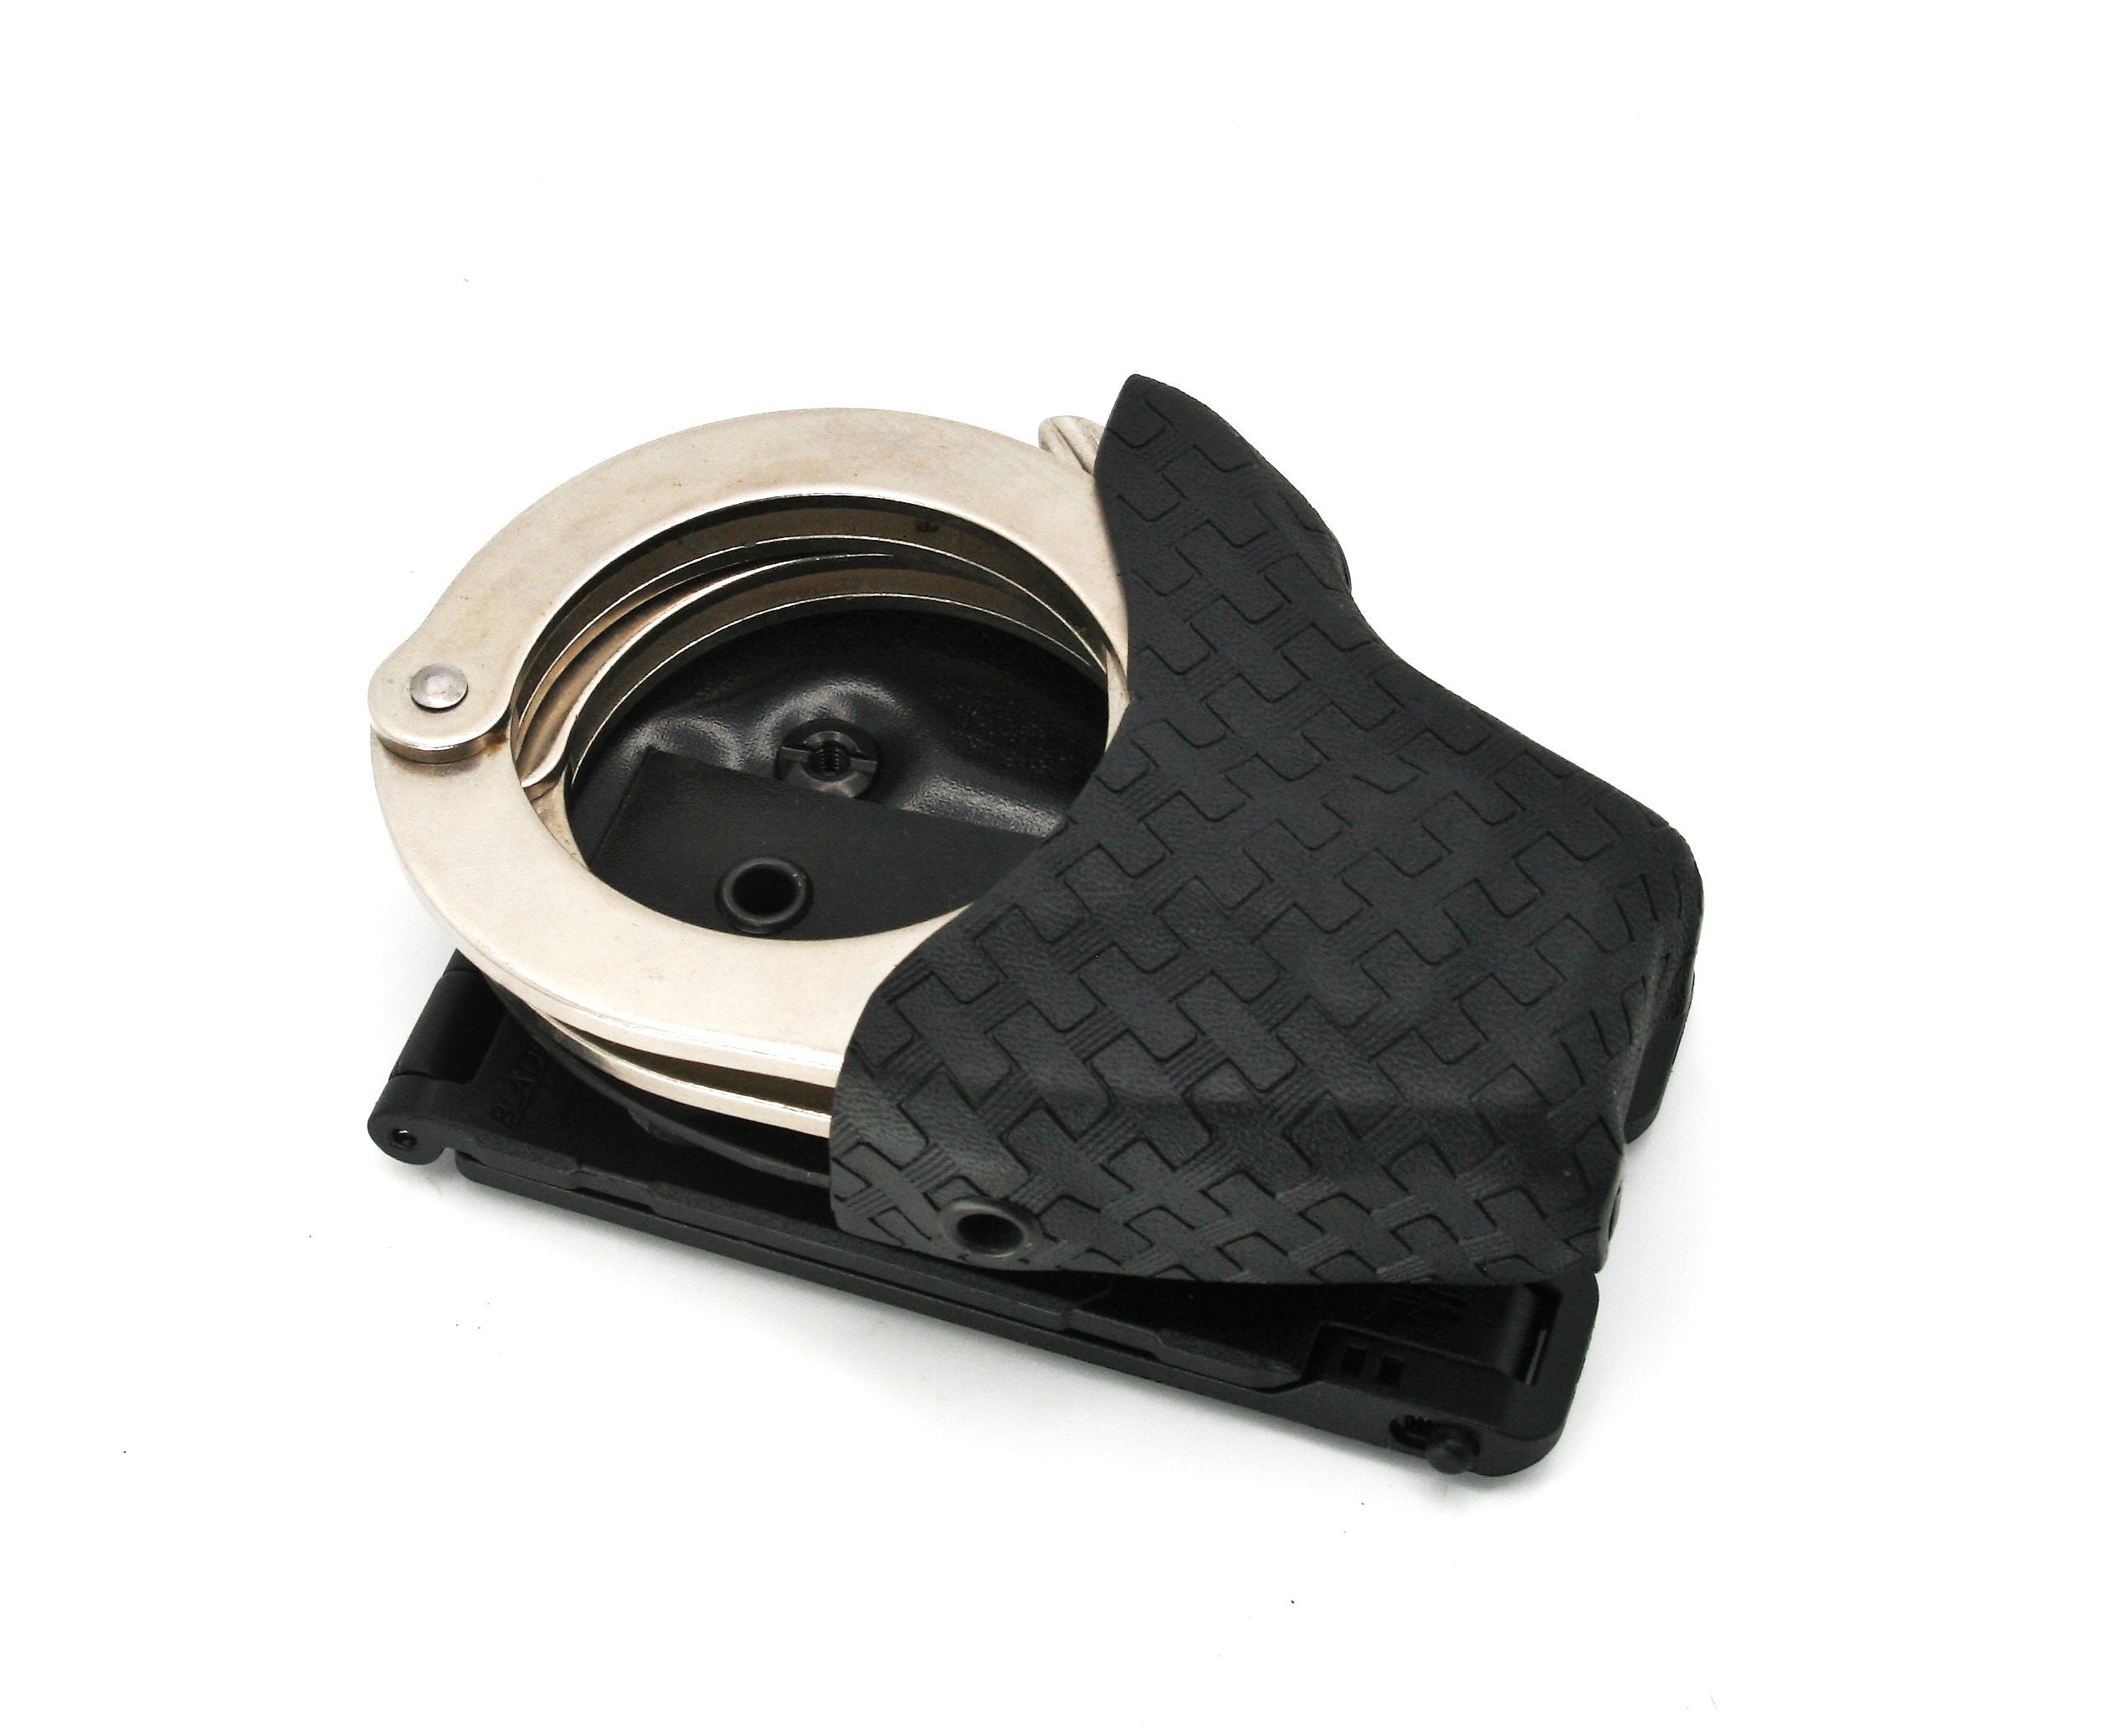 ES® System Cuff Case-ES® Innovation HandCuff Case-Versitle, low profile,  rugged,retention and presentation like no other